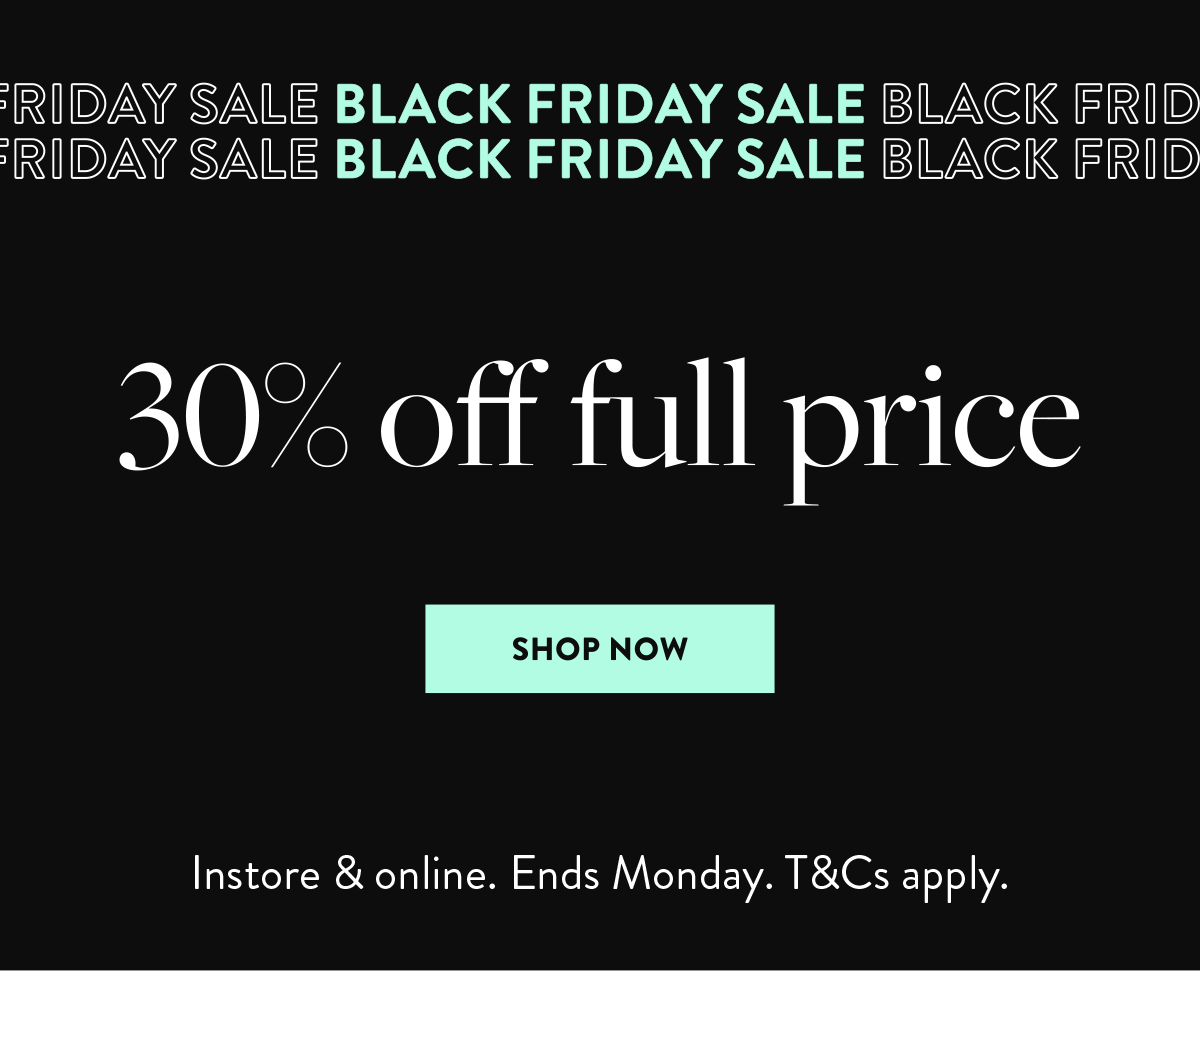 30% off full price   SHOP NOW   Instore & online. Ends Monday. T&Cs apply.